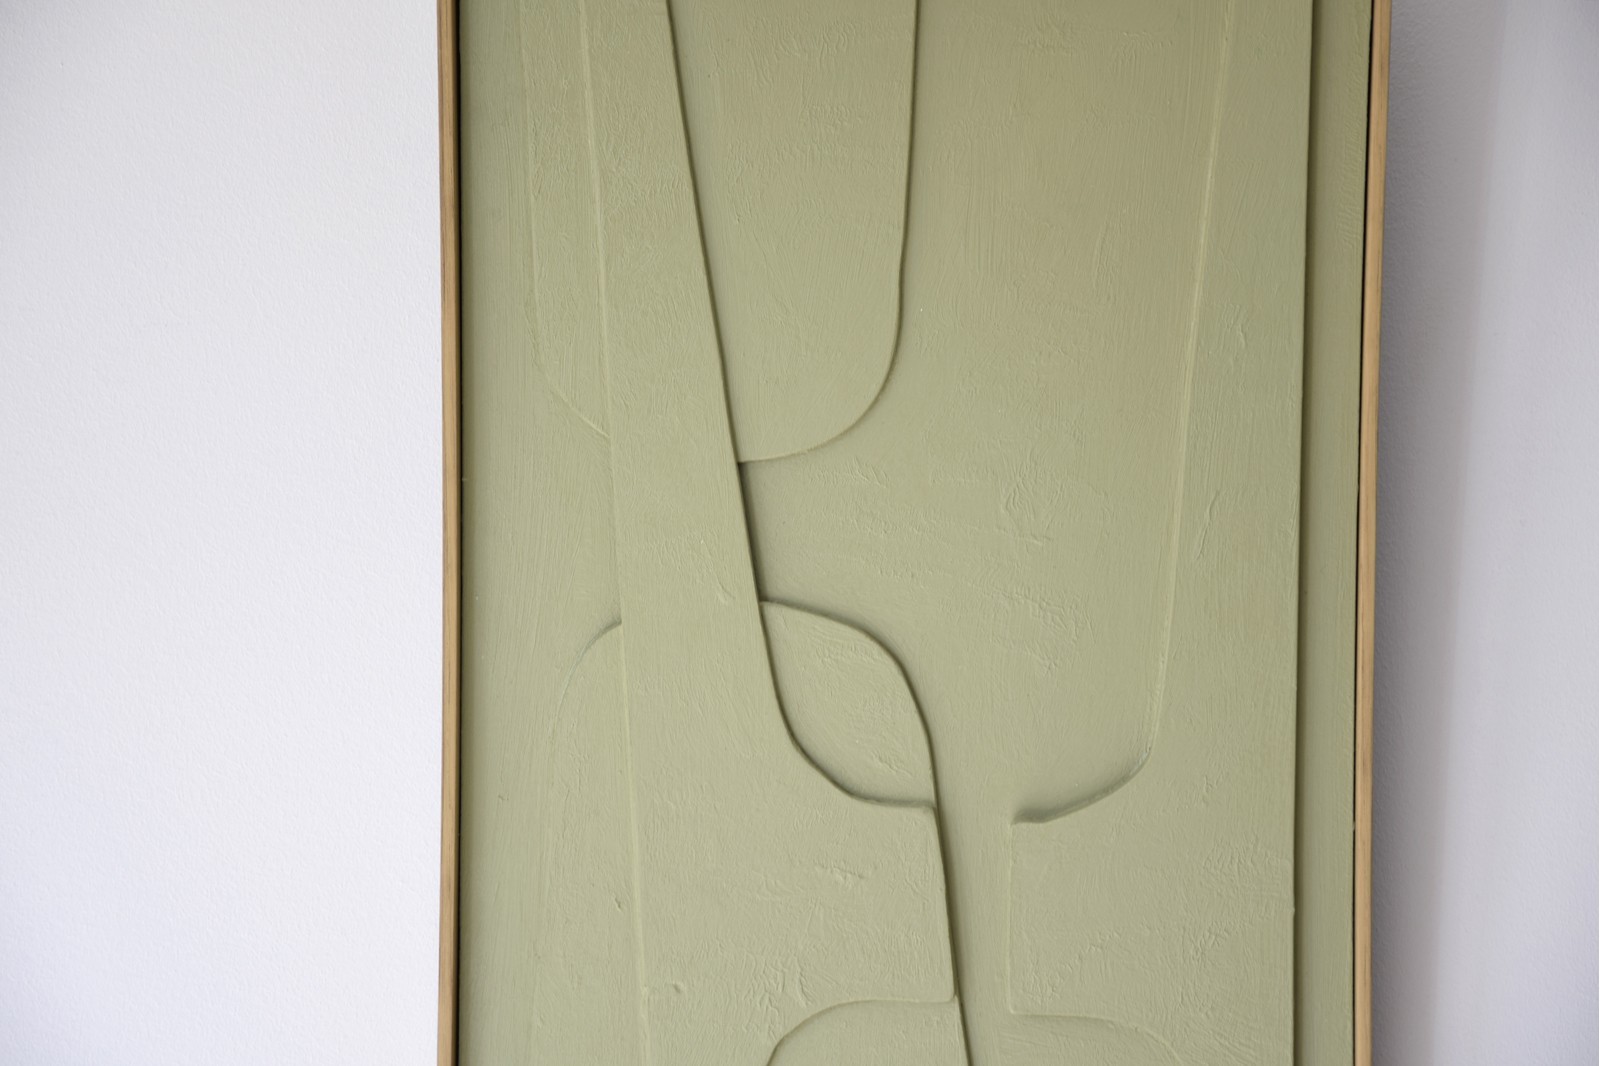 GREEN RELIEF PAINTING N.1